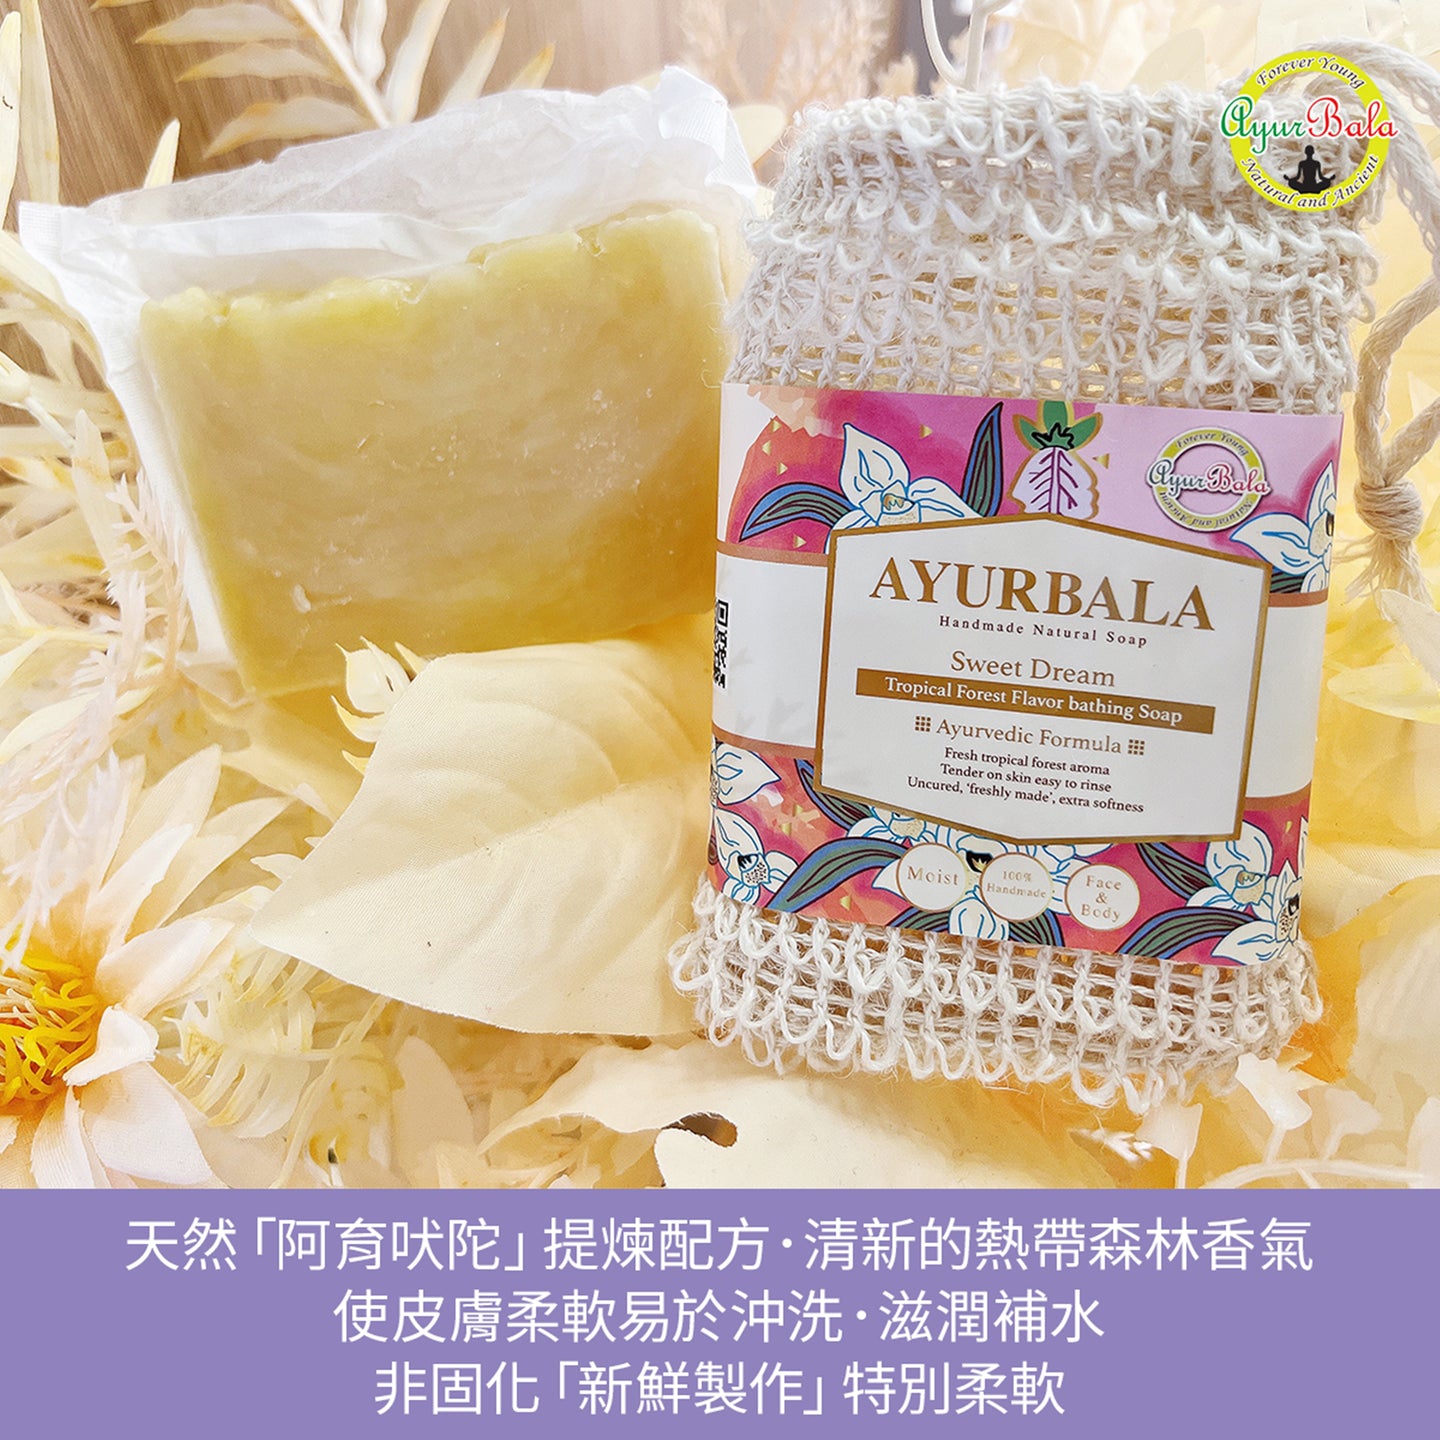 Sweet Dream Tropical Forest Flavor bathing Soap 甜睡手工肥皂-保濕 (2 items 15% off, 3 item 25% off) Free Delivery in HK